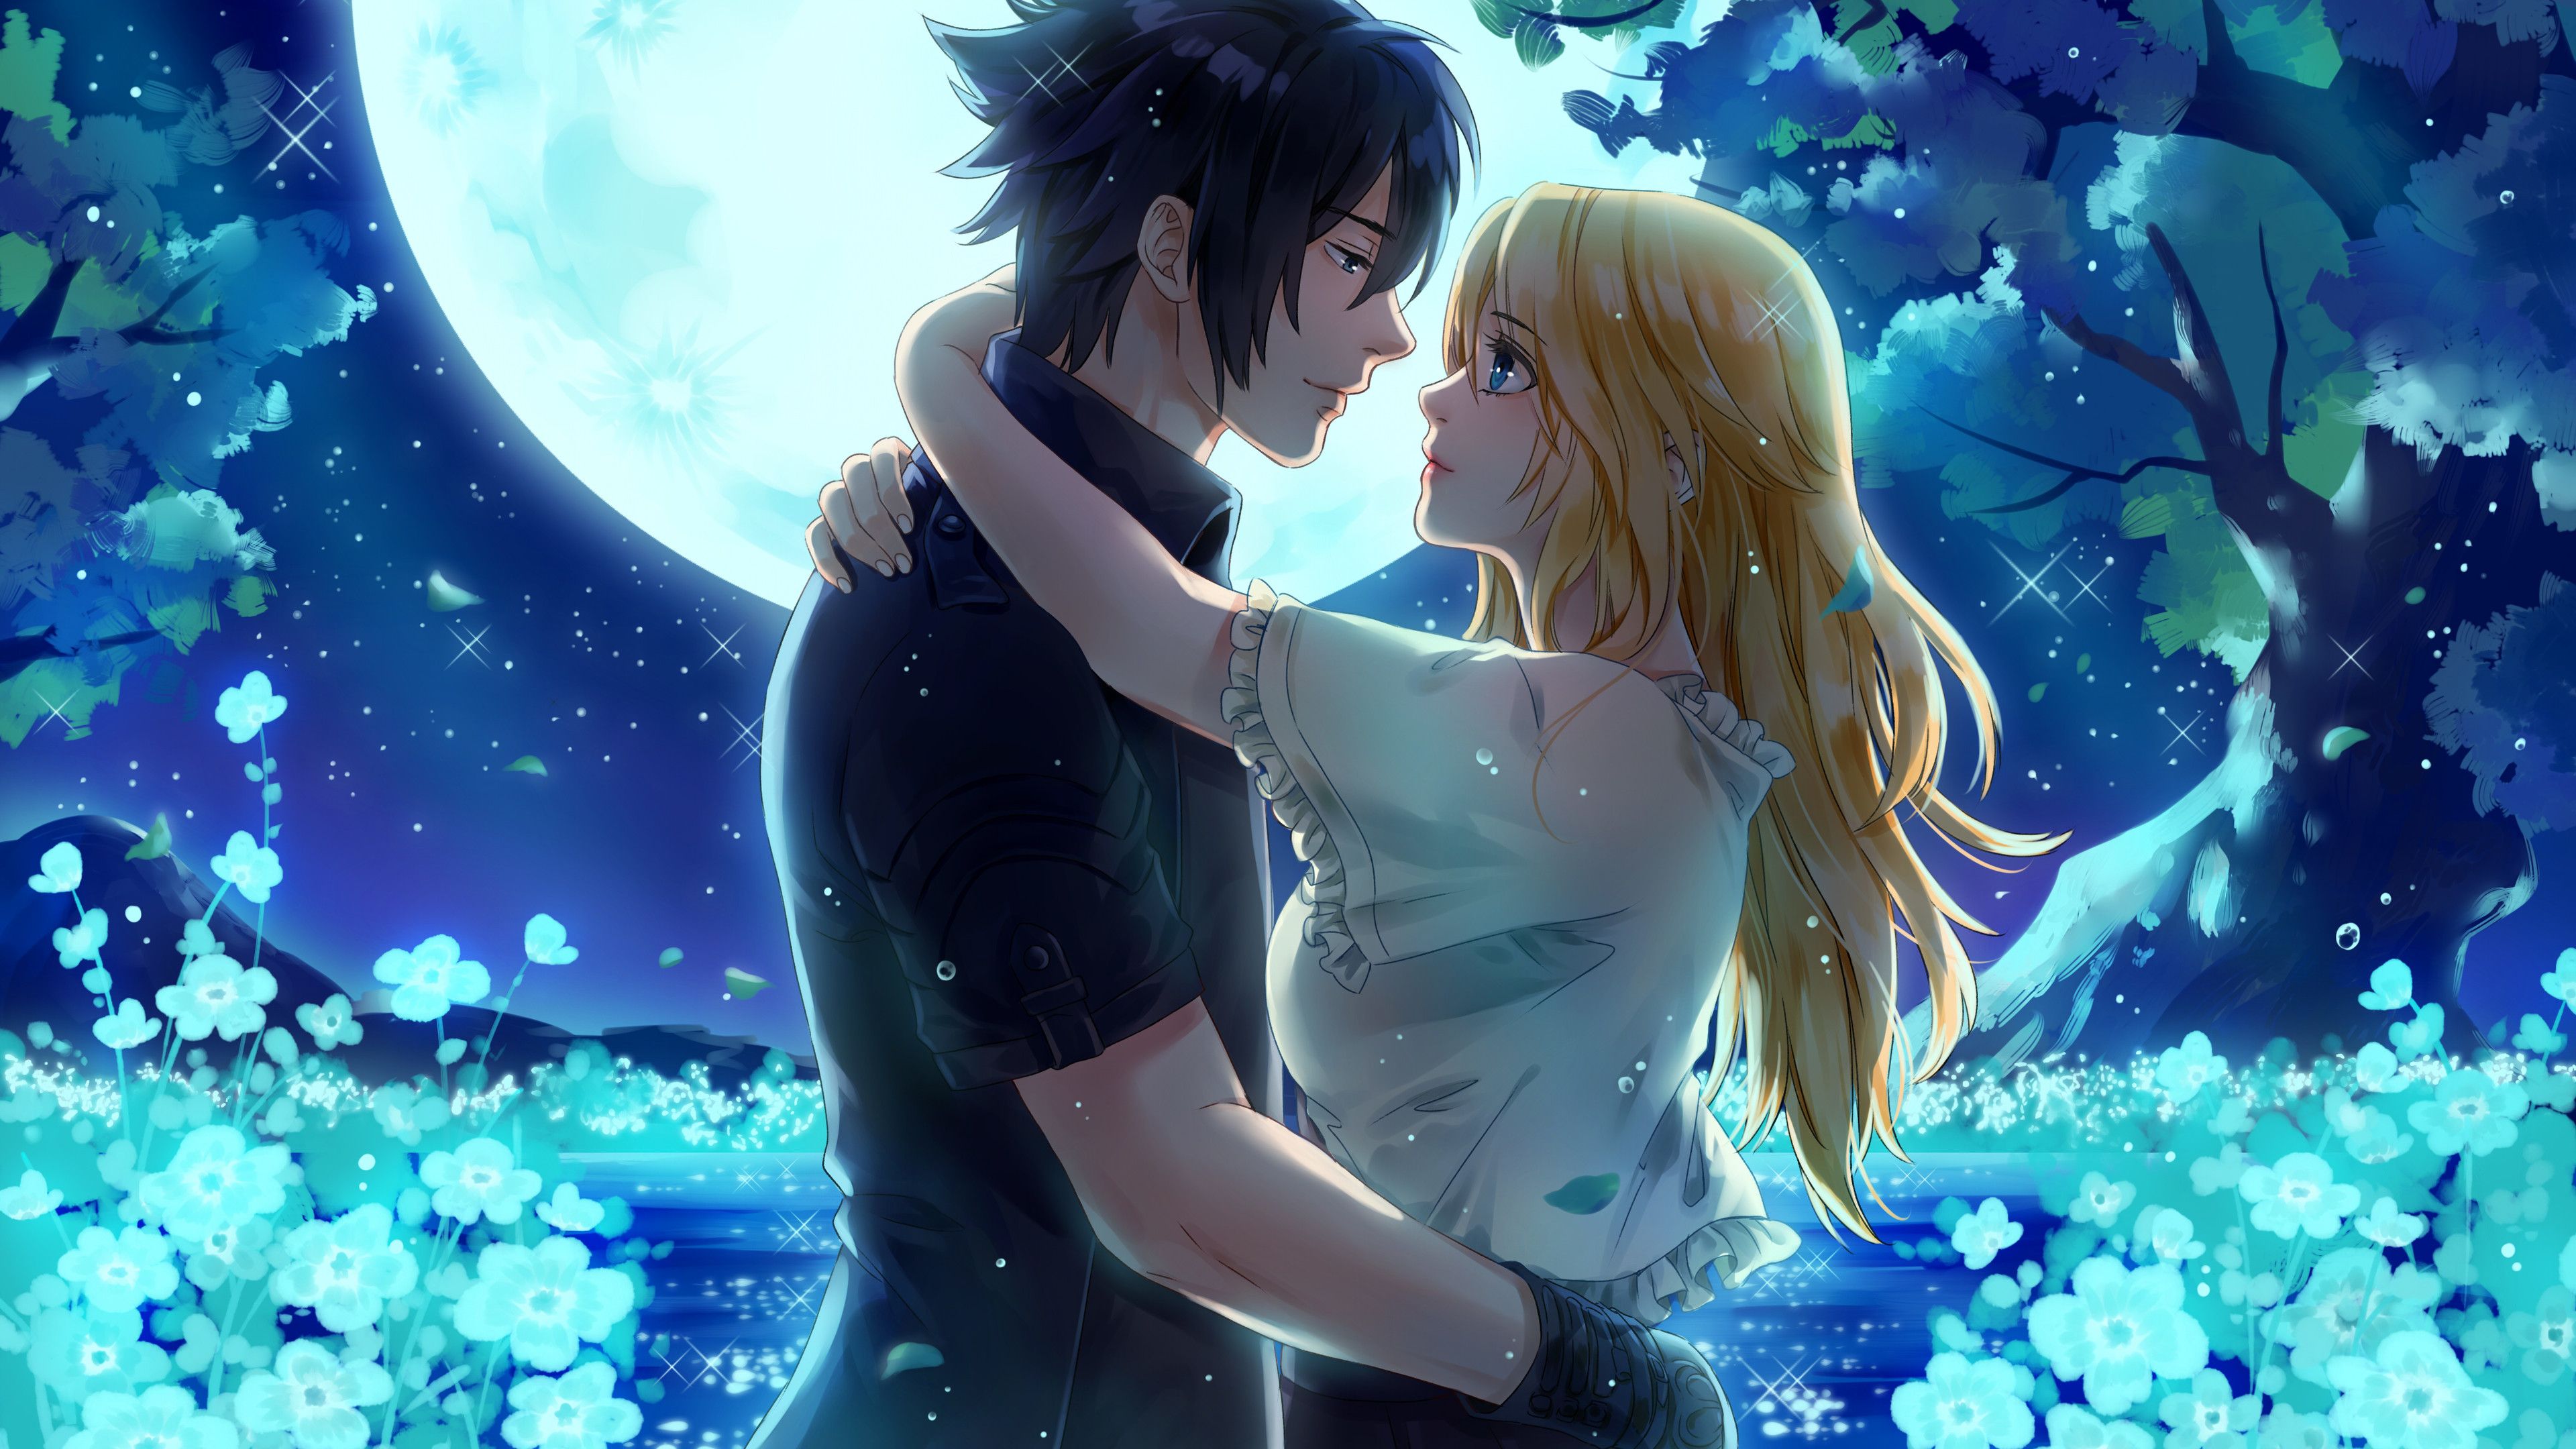 Anime Love Wallpapers  Top 35 Best Anime Love Backgrounds Download